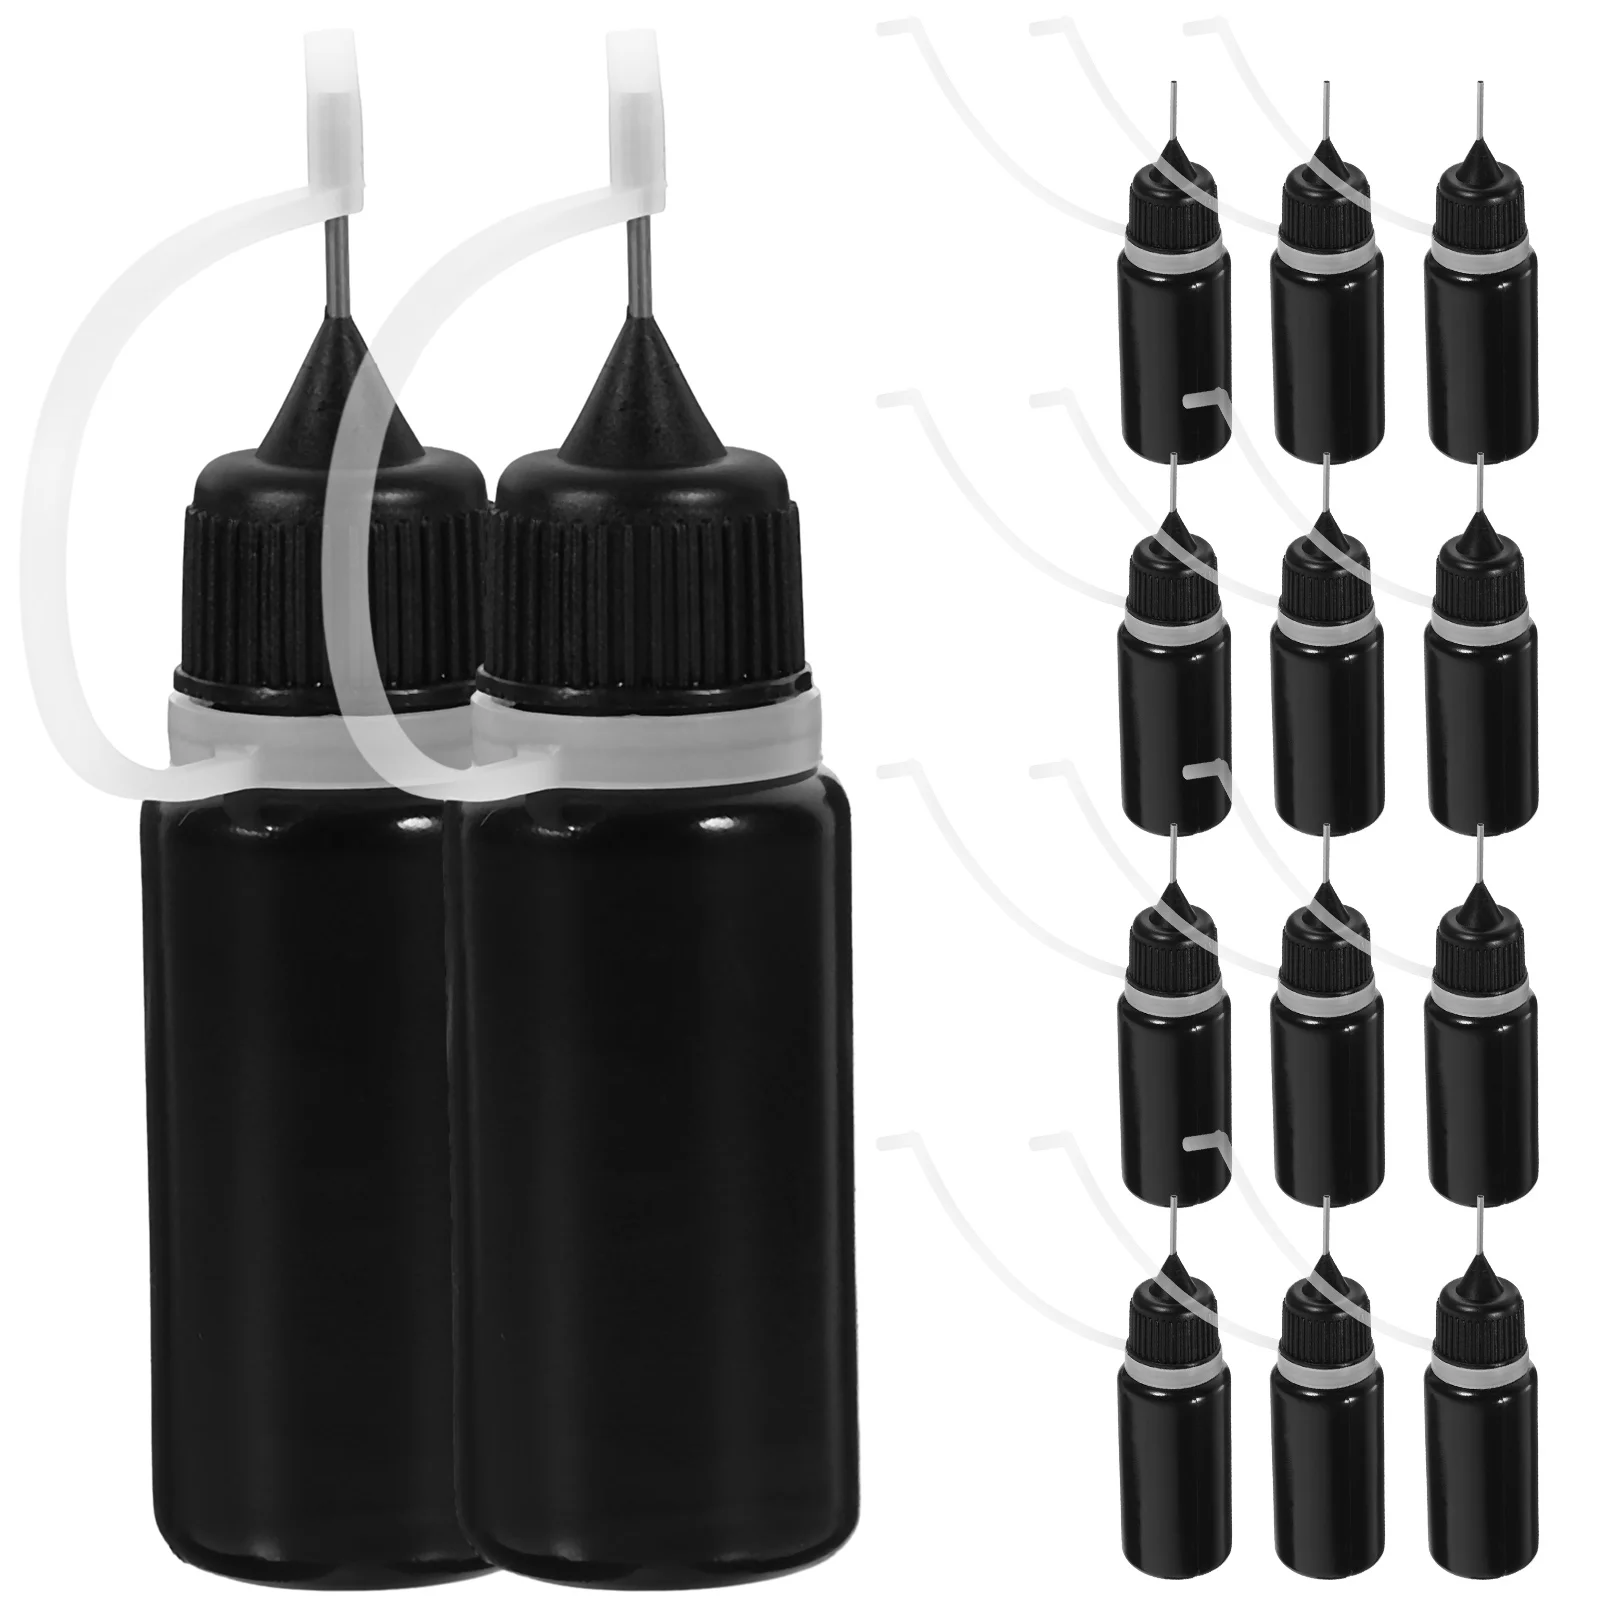 20 Pcs Bottled Squeeze Bottles Glue with Fine Tip for Liquids Needle Small Stainless Steel Precision Applicator Dispenser m1 2m1 6m2m2 5m4 carbon steel phillips flat head countersunk screw paint treatment anti loose spot blue glue screw 1176